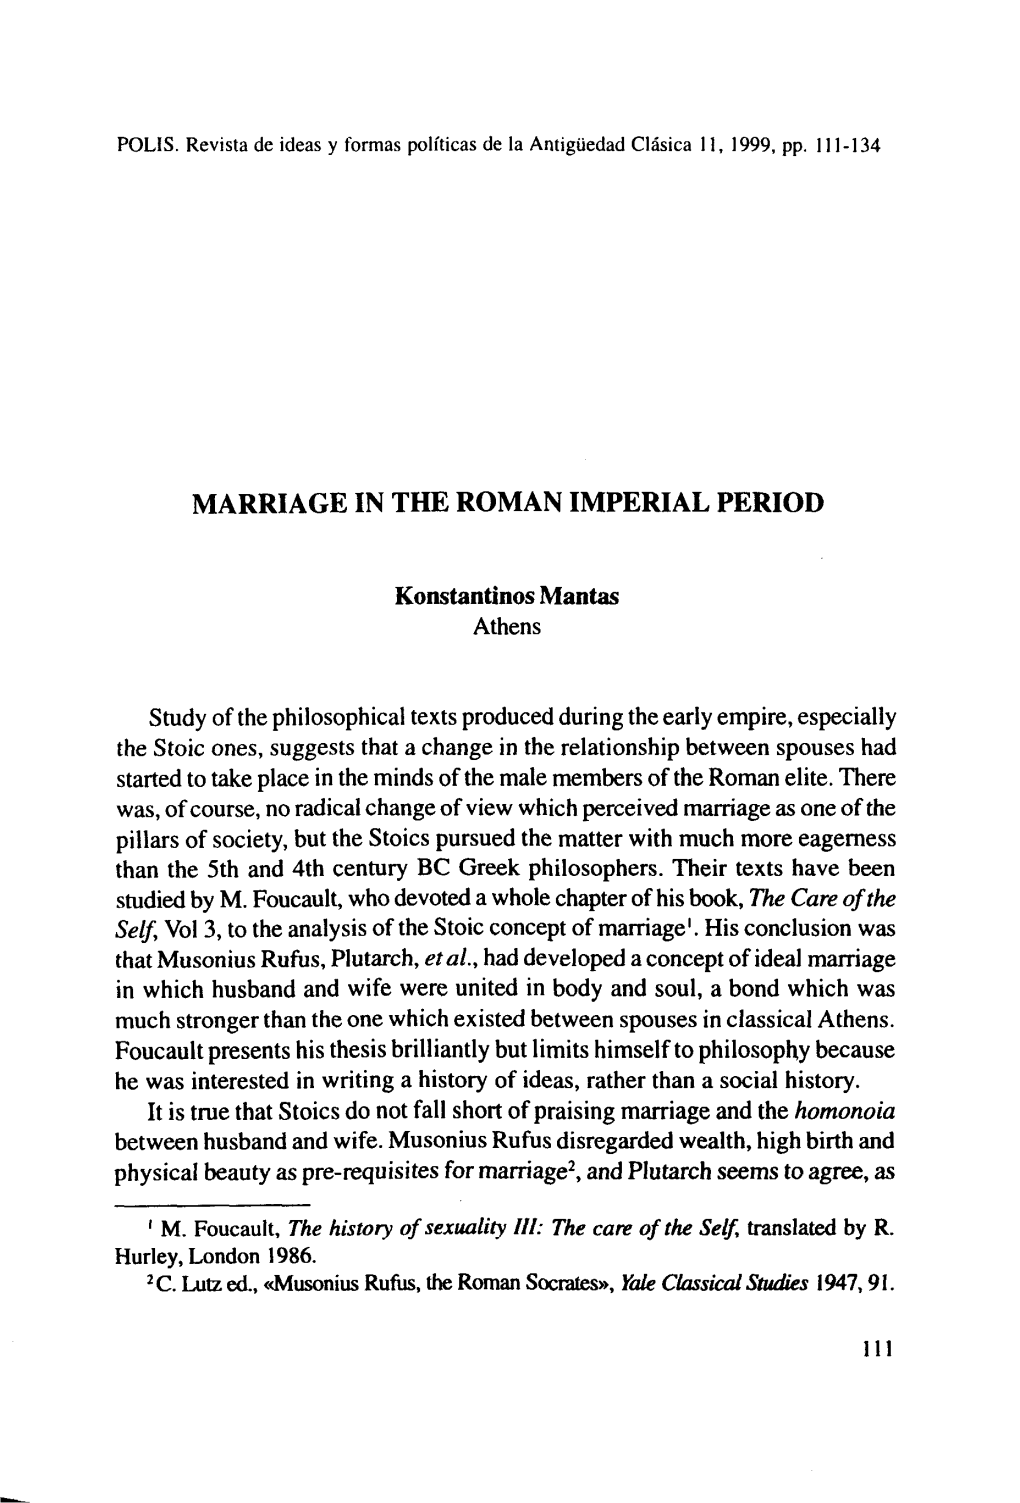 Marriage in the Roman Imperial Period